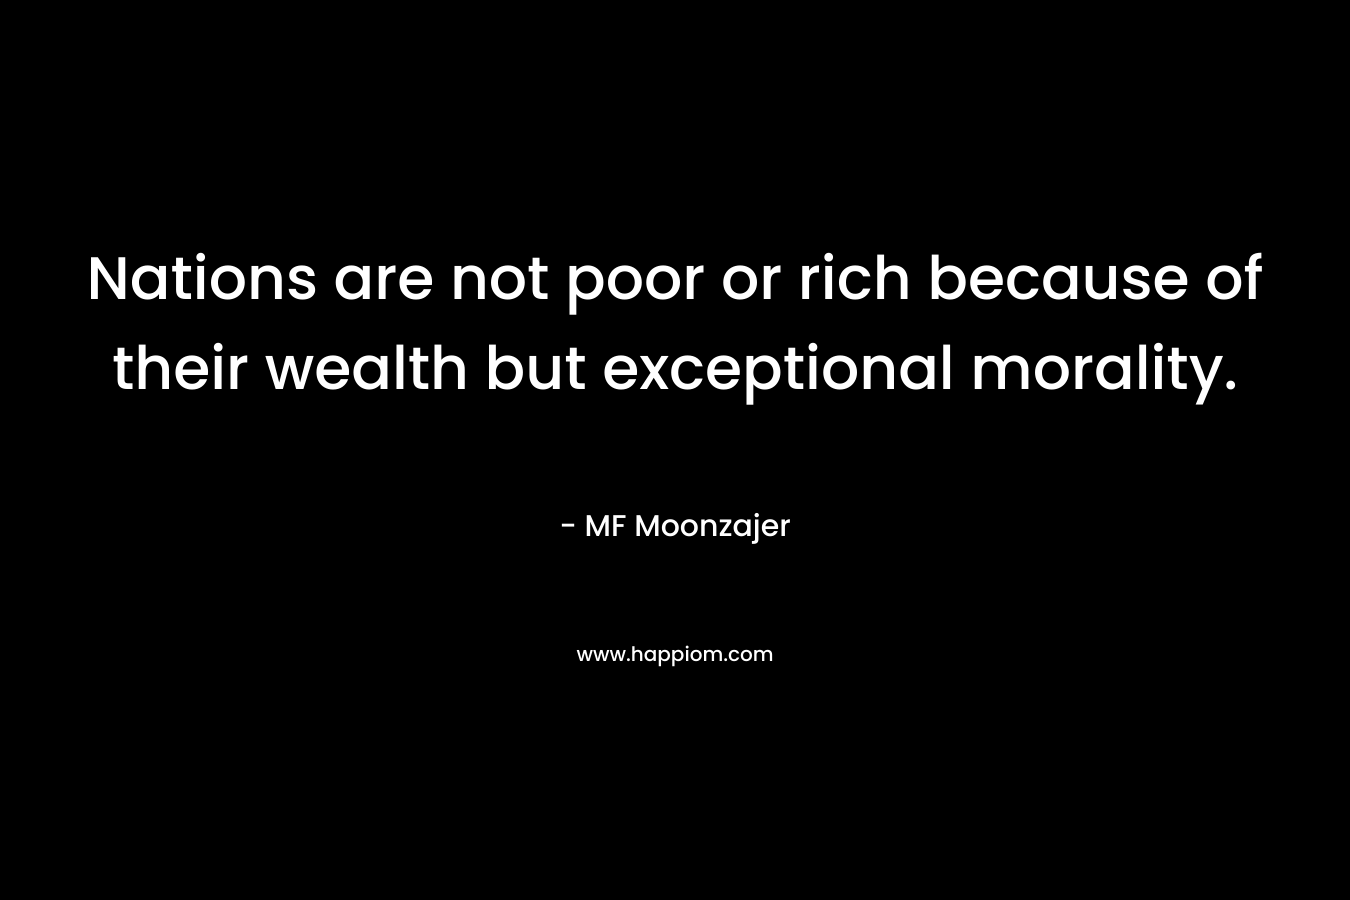 Nations are not poor or rich because of their wealth but exceptional morality.